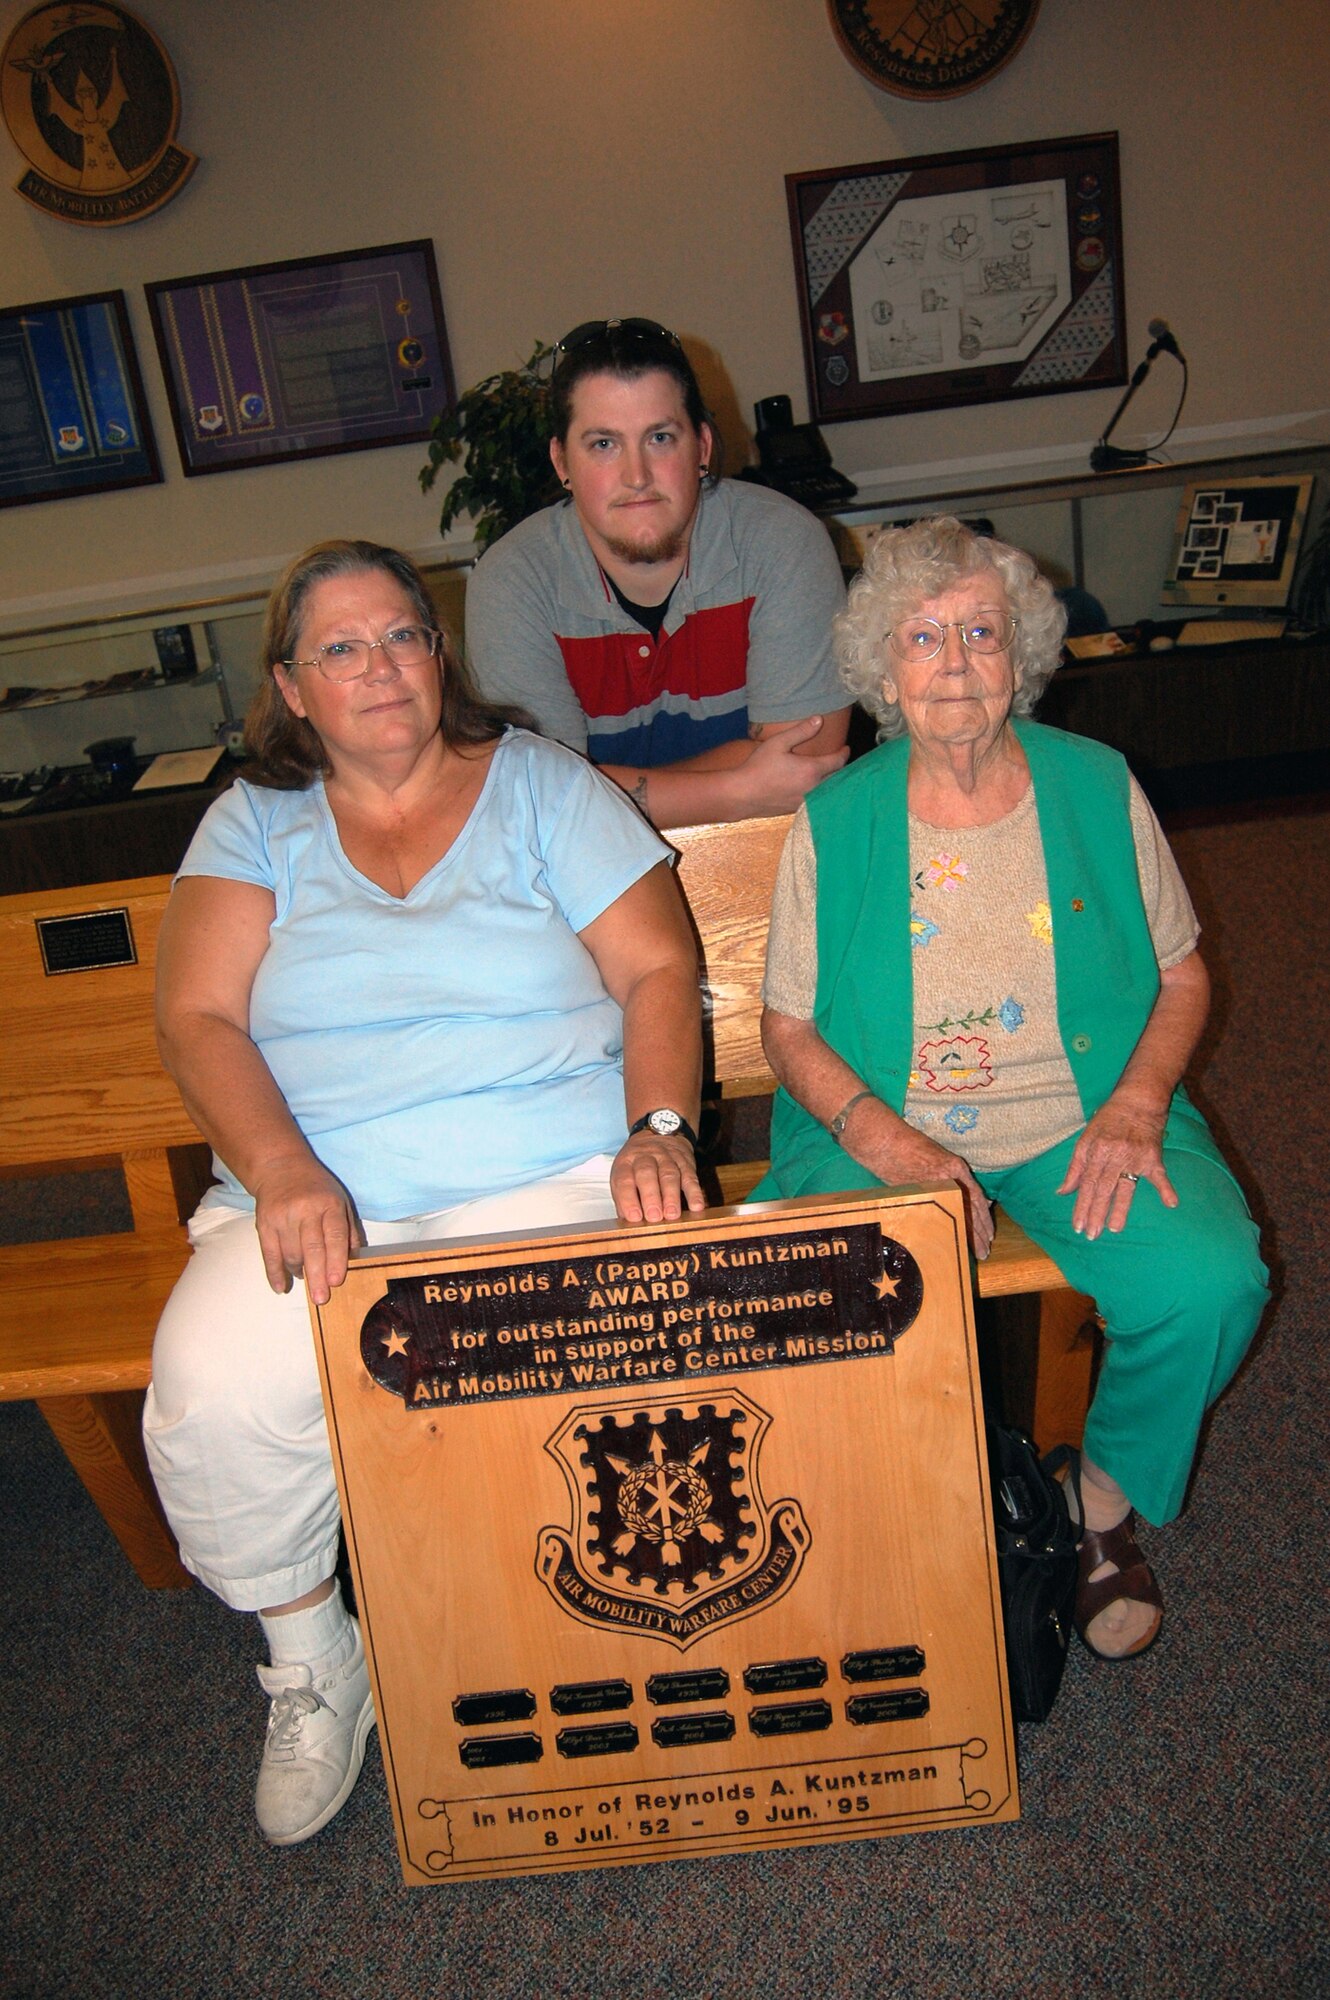 Valerie (spouse), Jeremy (son), and Helen Kuntzman (mother) stop for a photo by the plaque bearing the name of former Tech. Sgt. Reynolds A. Kuntzman, during a visit to the U.S. Air Force Expeditionary Center Aug. 21, 2008.  Sergeant Kuntzman died on June 9, 1995, while assigned to the center with the 421st Ground Combat Readiness Squadron.  After his death, the center's leadership created the Reynolds A. Kuntzman Duty performance award given annually to an Airman in the grades of E-1 through E-6 recognizing superior duty performance in support of the center's mission and community.  (U.S. Air Force Photo/Tech. Sgt. Scott T. Sturkol)